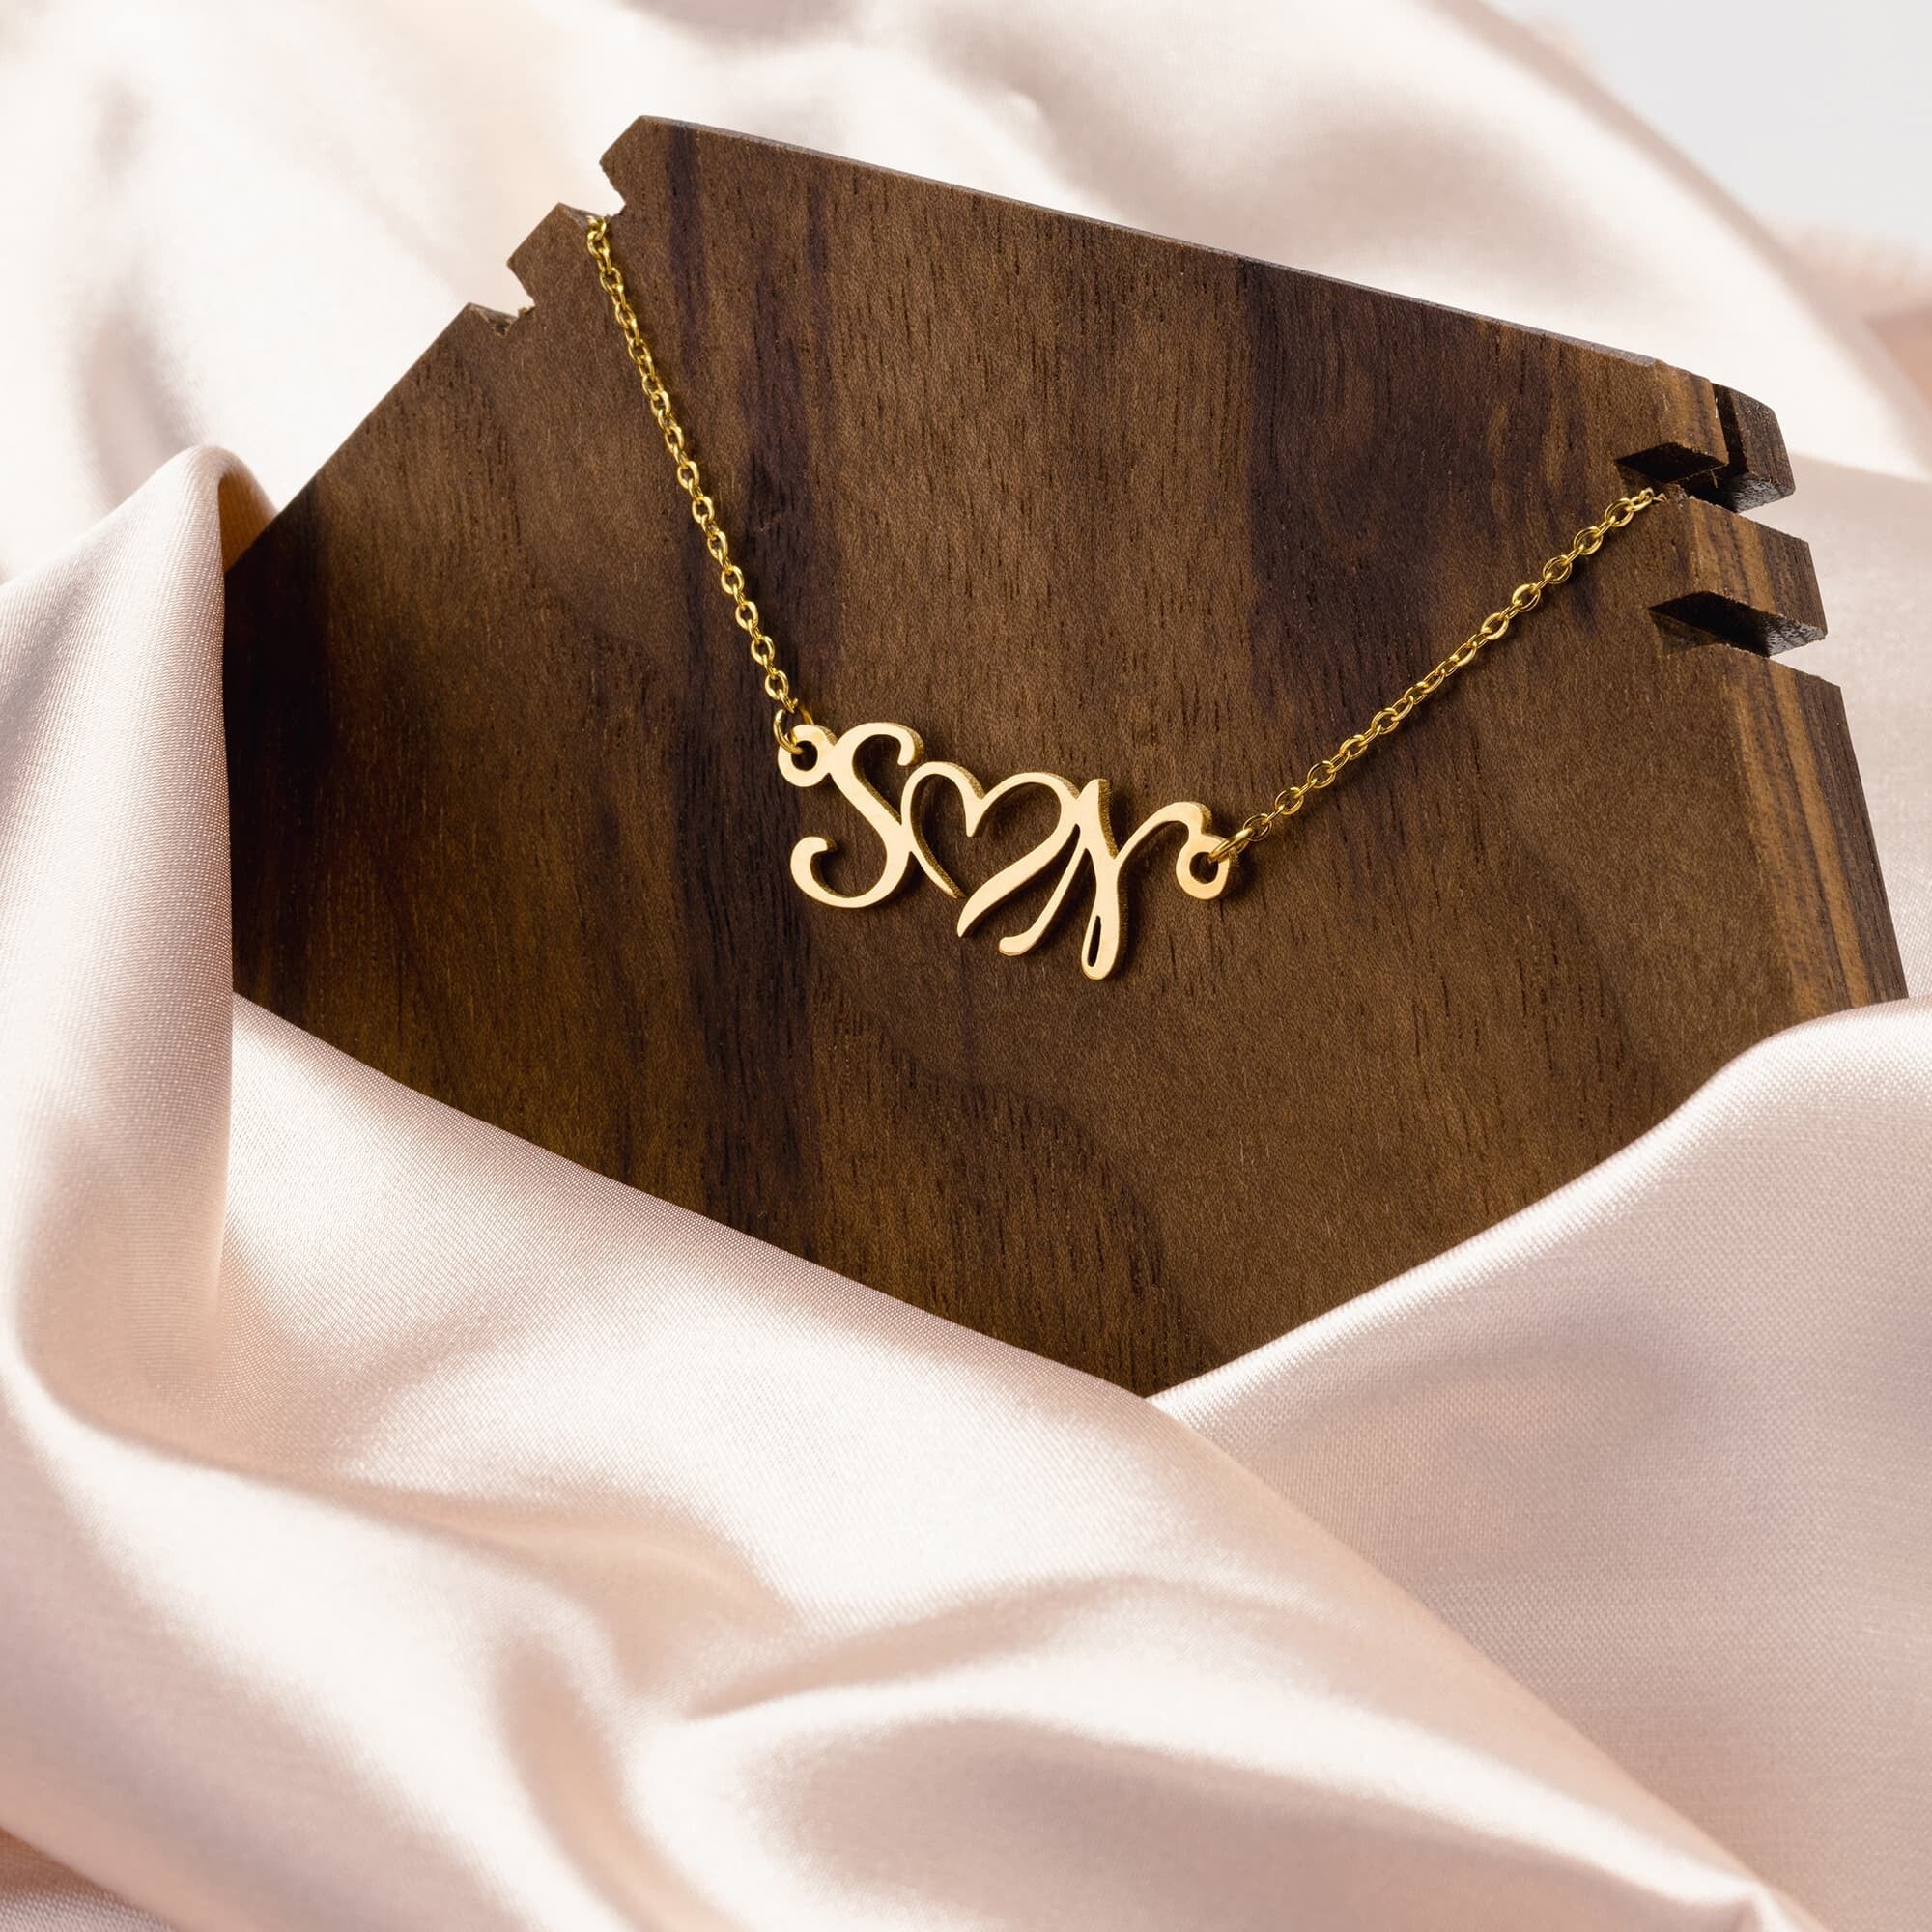 Jewelry Sentimental Couples Initials Necklace